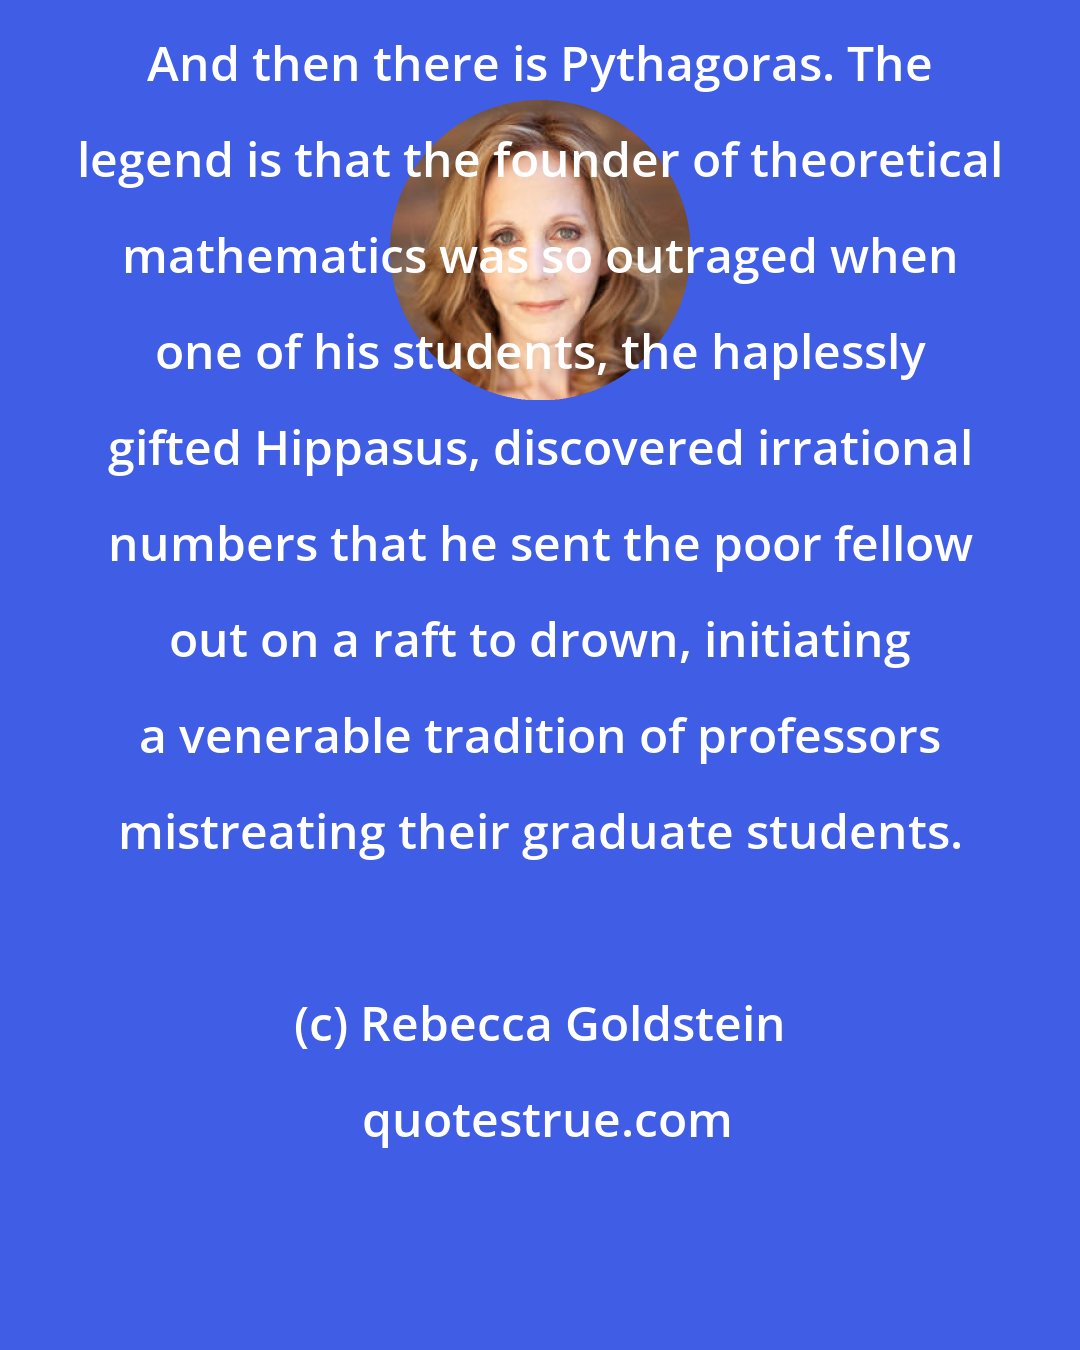 Rebecca Goldstein: And then there is Pythagoras. The legend is that the founder of theoretical mathematics was so outraged when one of his students, the haplessly gifted Hippasus, discovered irrational numbers that he sent the poor fellow out on a raft to drown, initiating a venerable tradition of professors mistreating their graduate students.